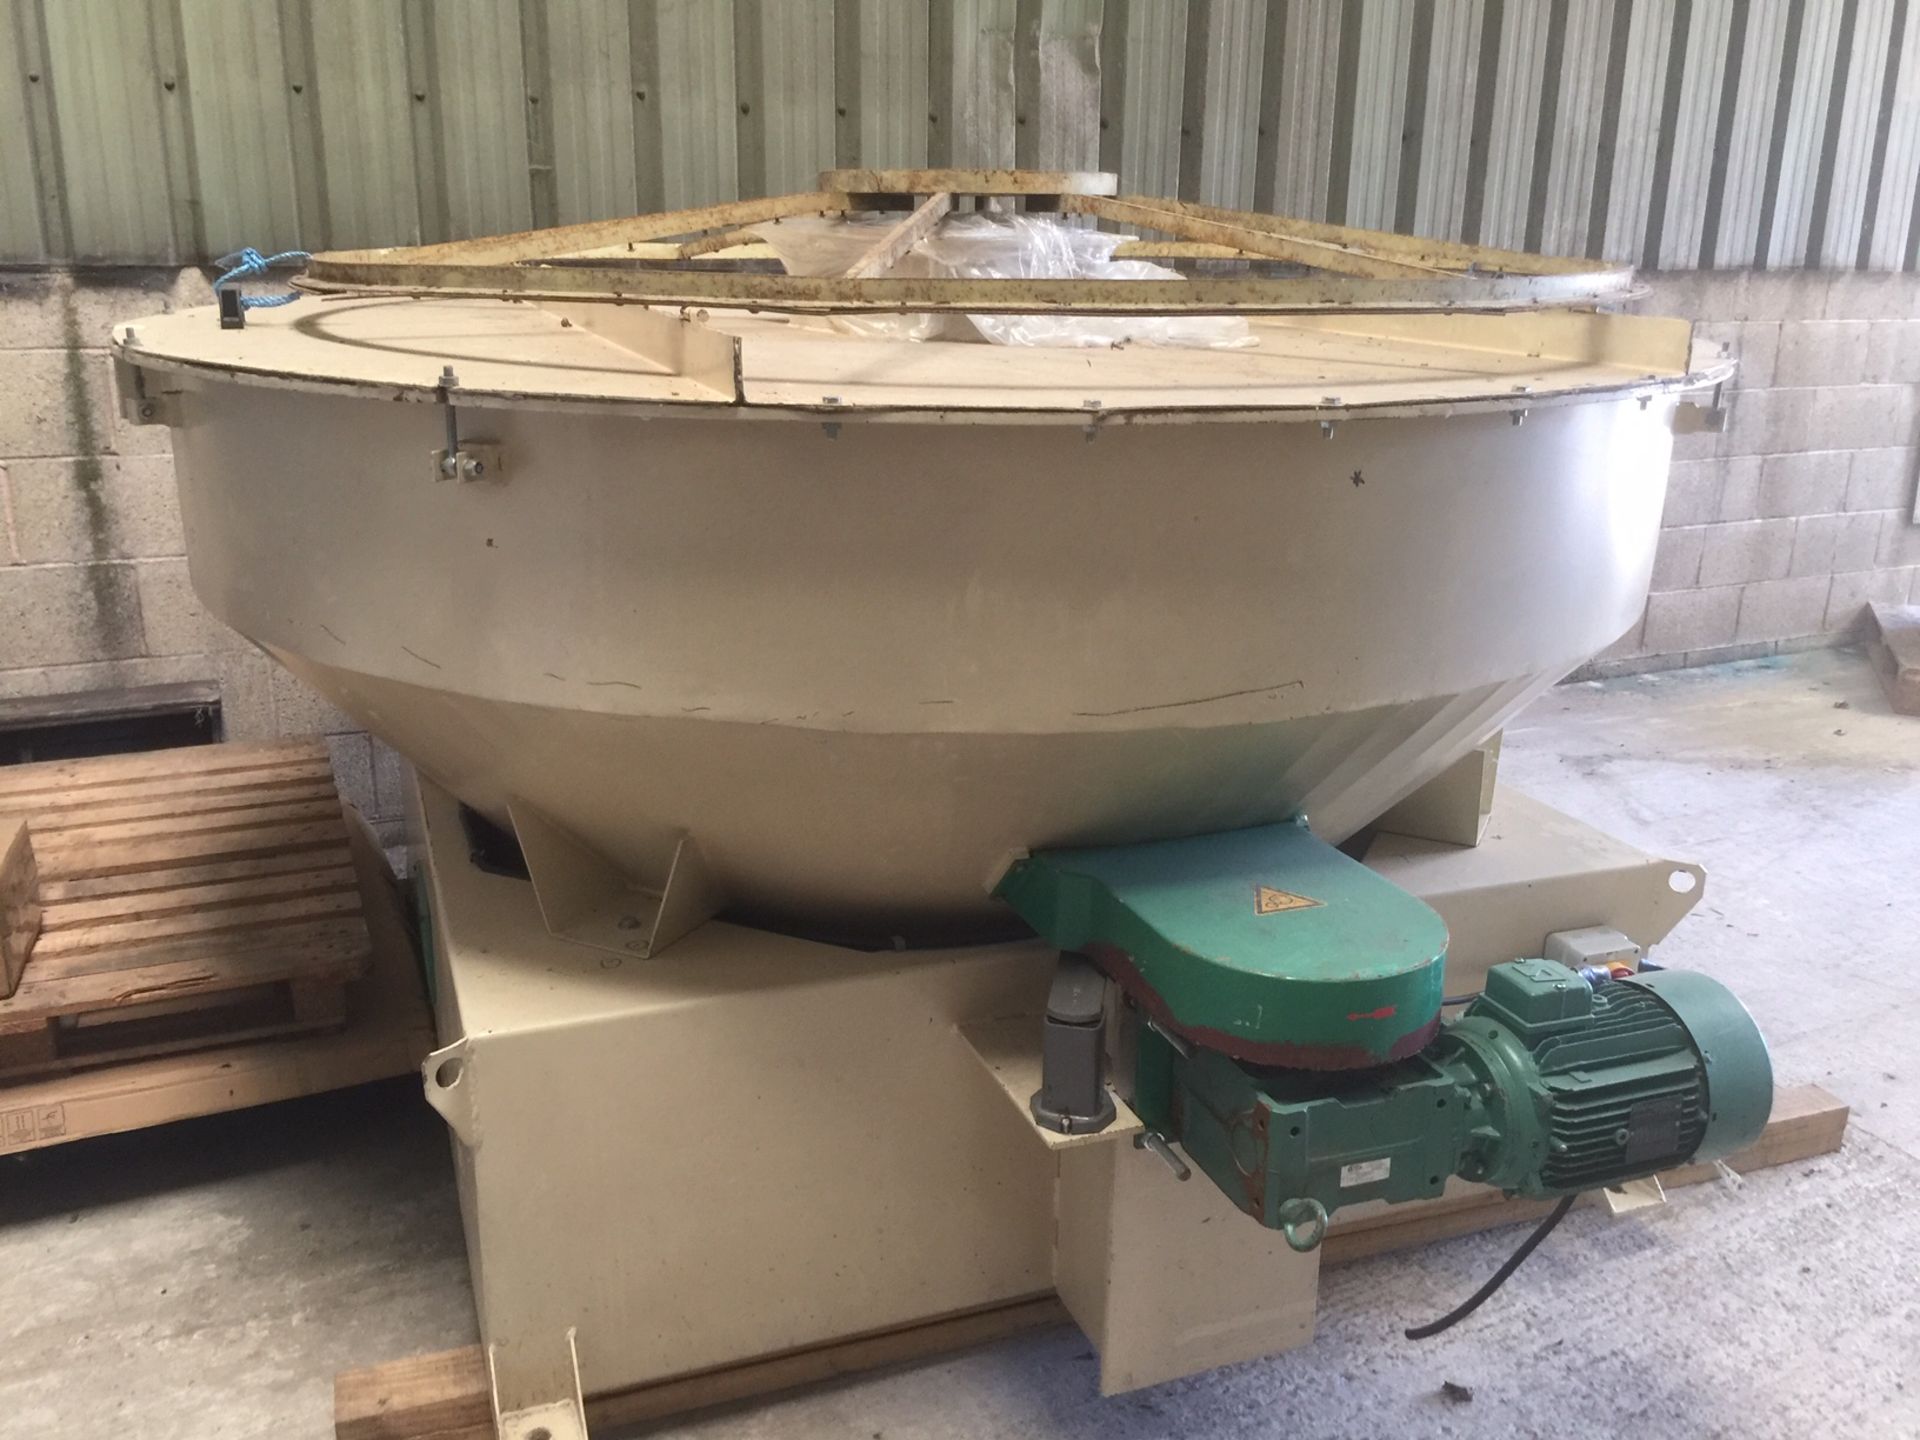 Sieve - PTN rotary sieve model SR 200 E built in 2008. It has a 4kw rotation drive and a 1.5kw